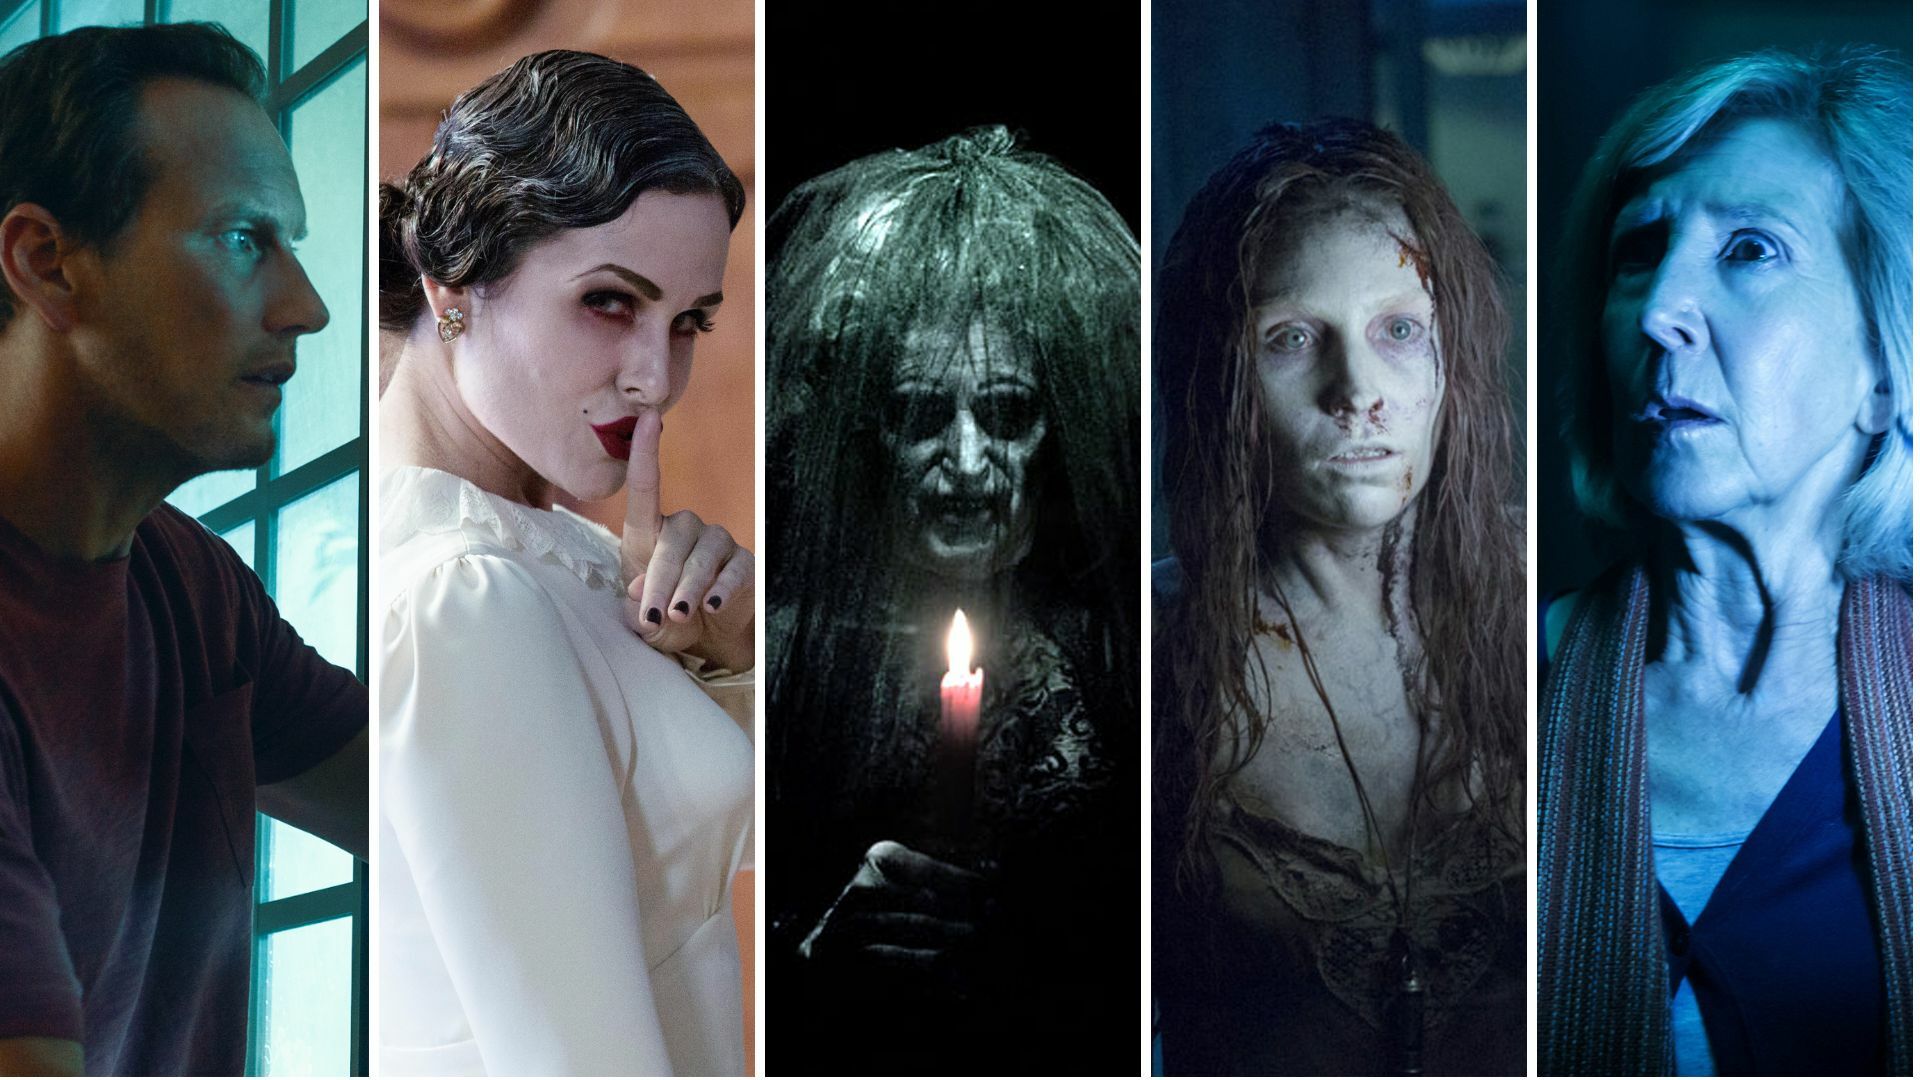 Composite of images from Insidious franchise movies 